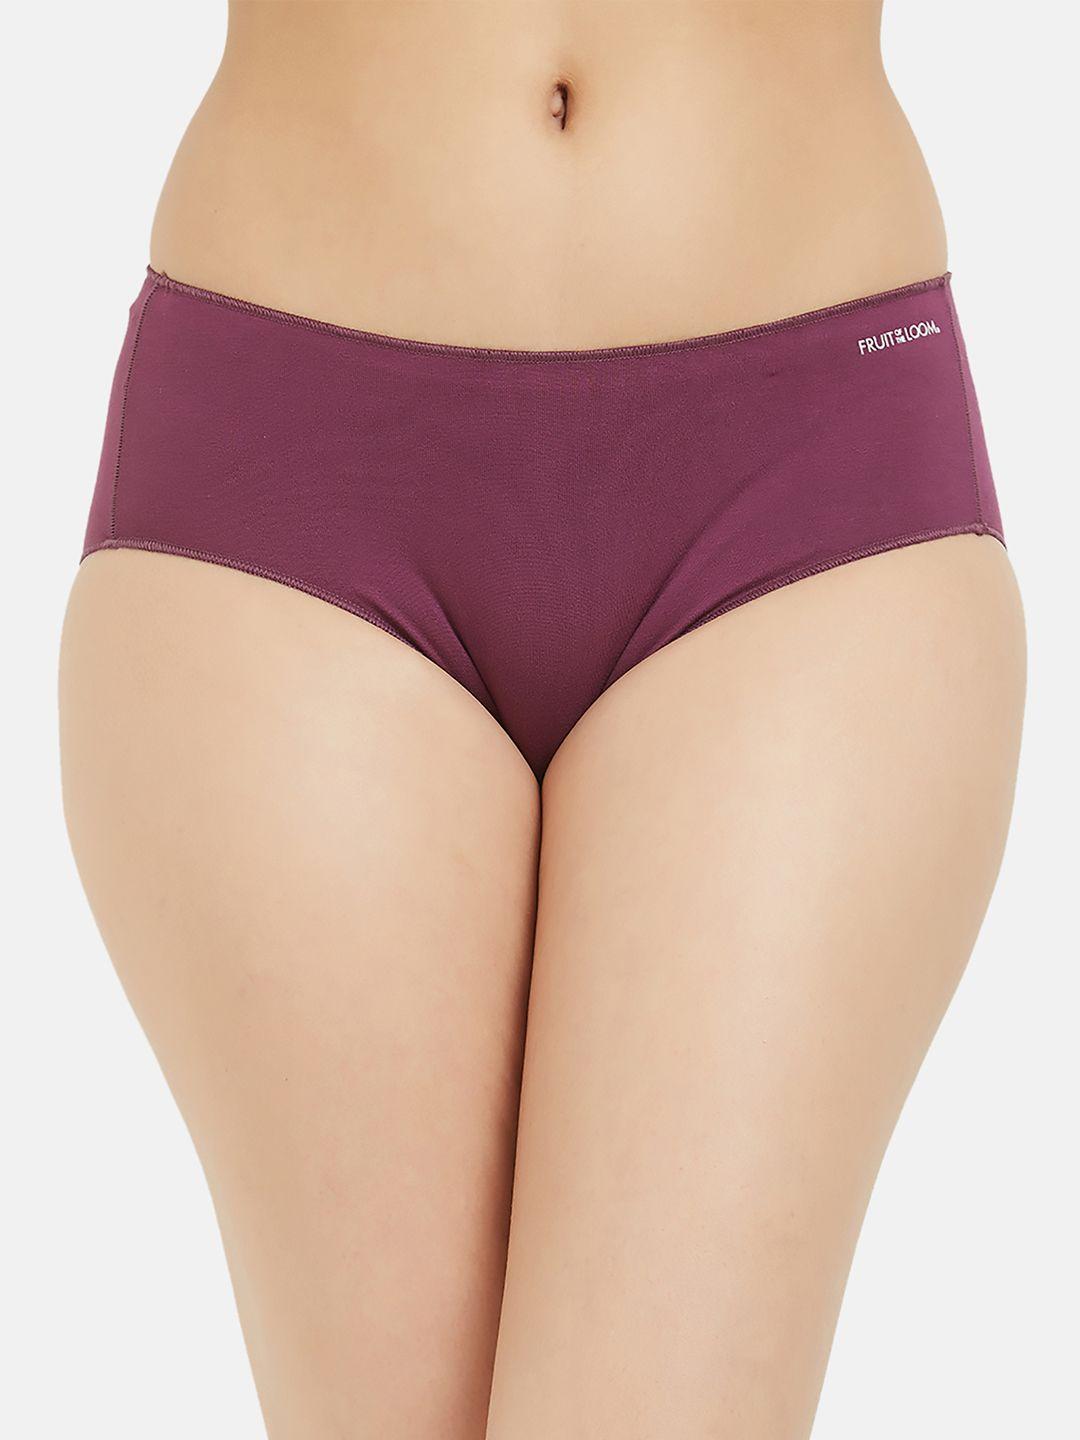 fruit-of-the-loom-women-purple-solid-hipster-briefs-fhps04-a1s3